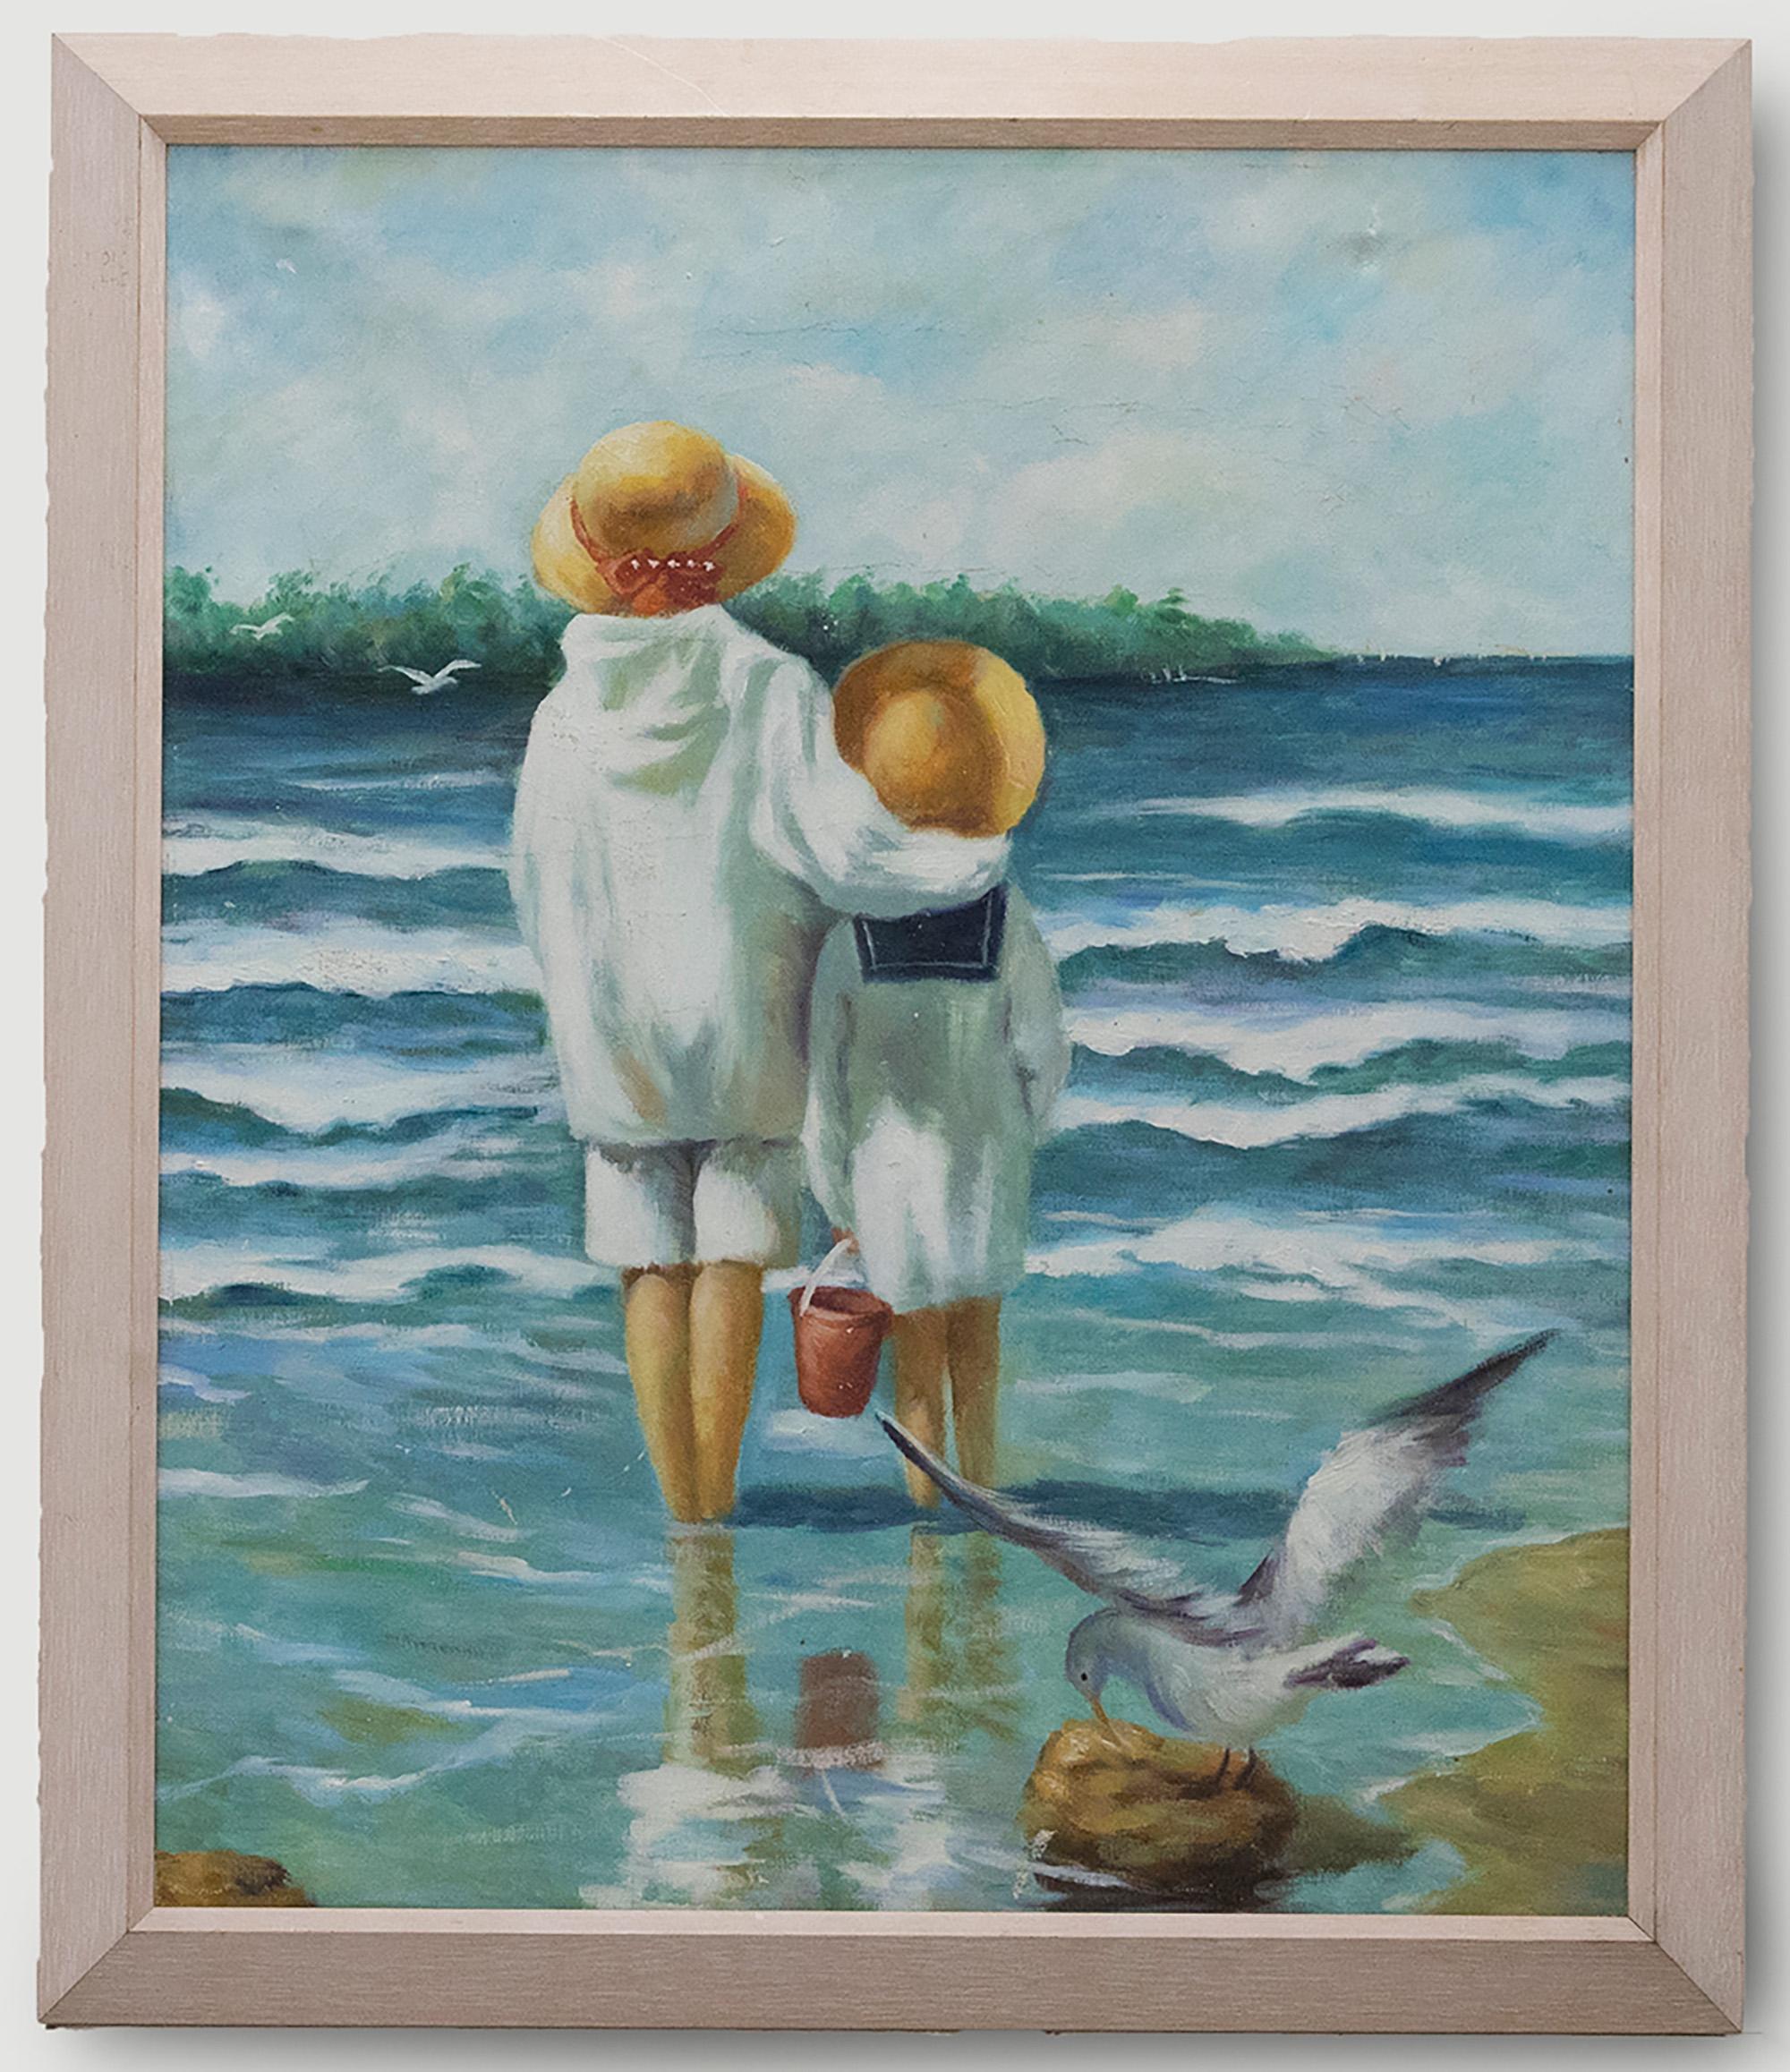 A charming study of two children, sand bucket in hand, looking out to sea in their summer bonnets. Unsigned. Presented in a light wooden frame. On board. 